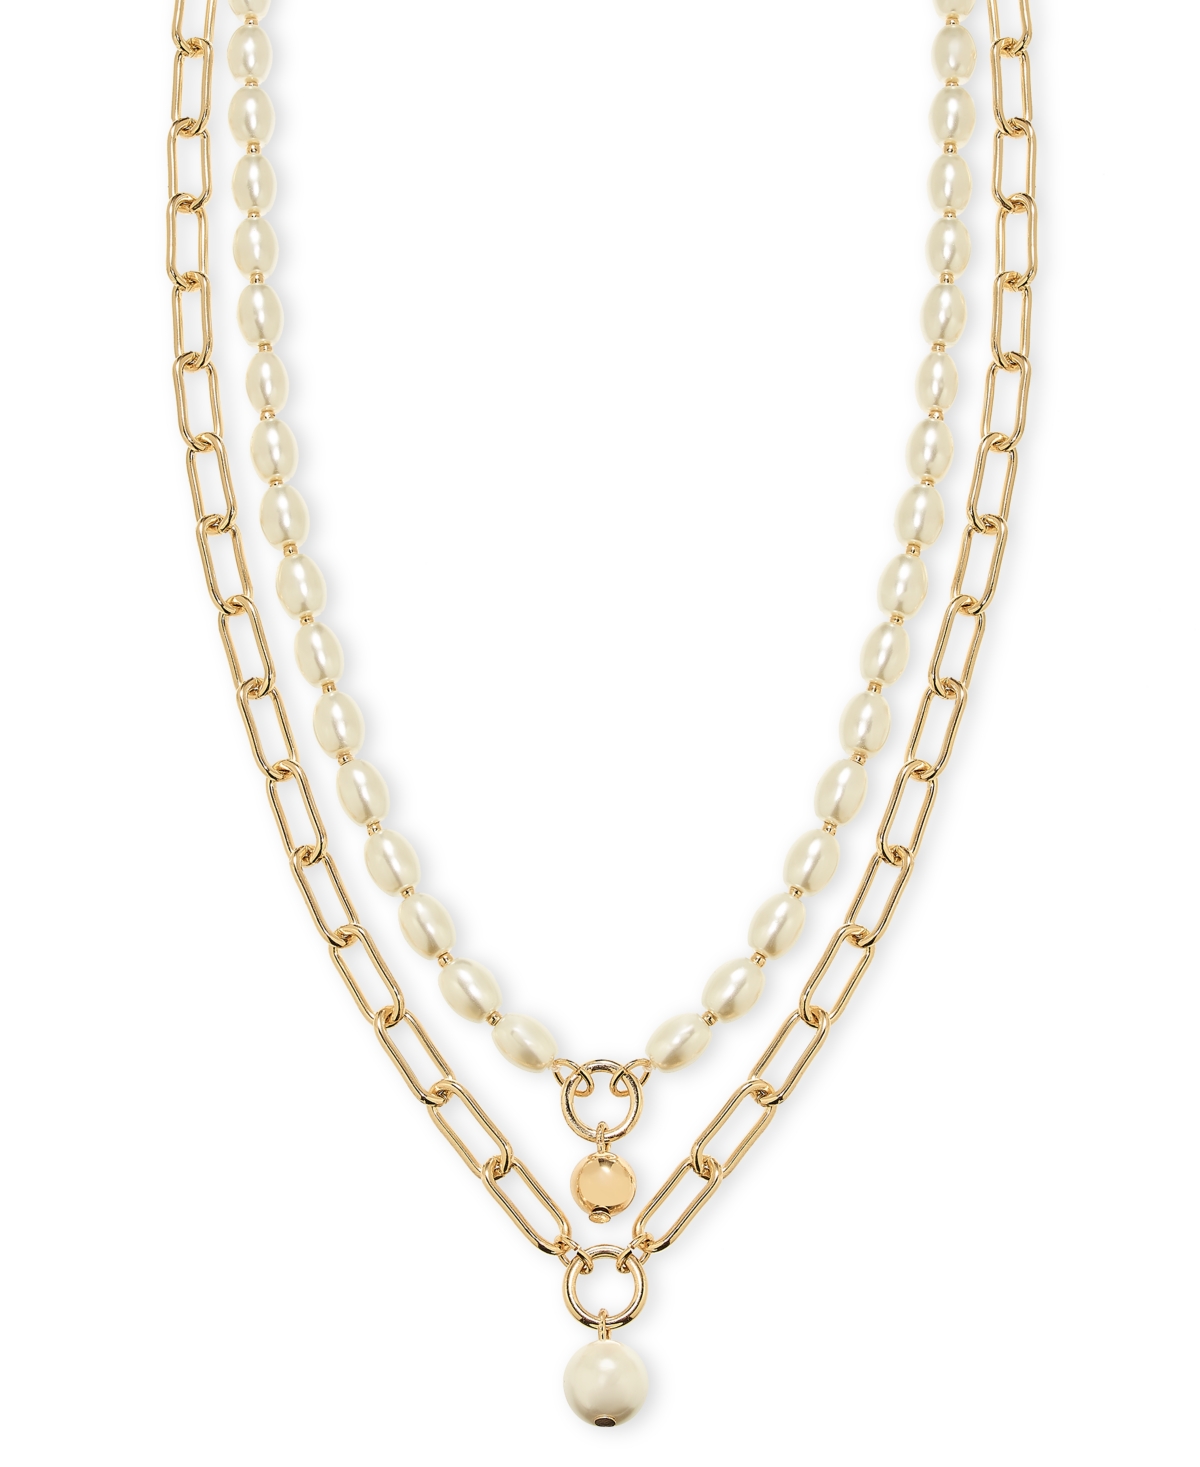 On 34th Gold-tone Chain Link & Imitation Pearl Layered Pendant Necklace, 16" + 2" Extender, Created For Macy